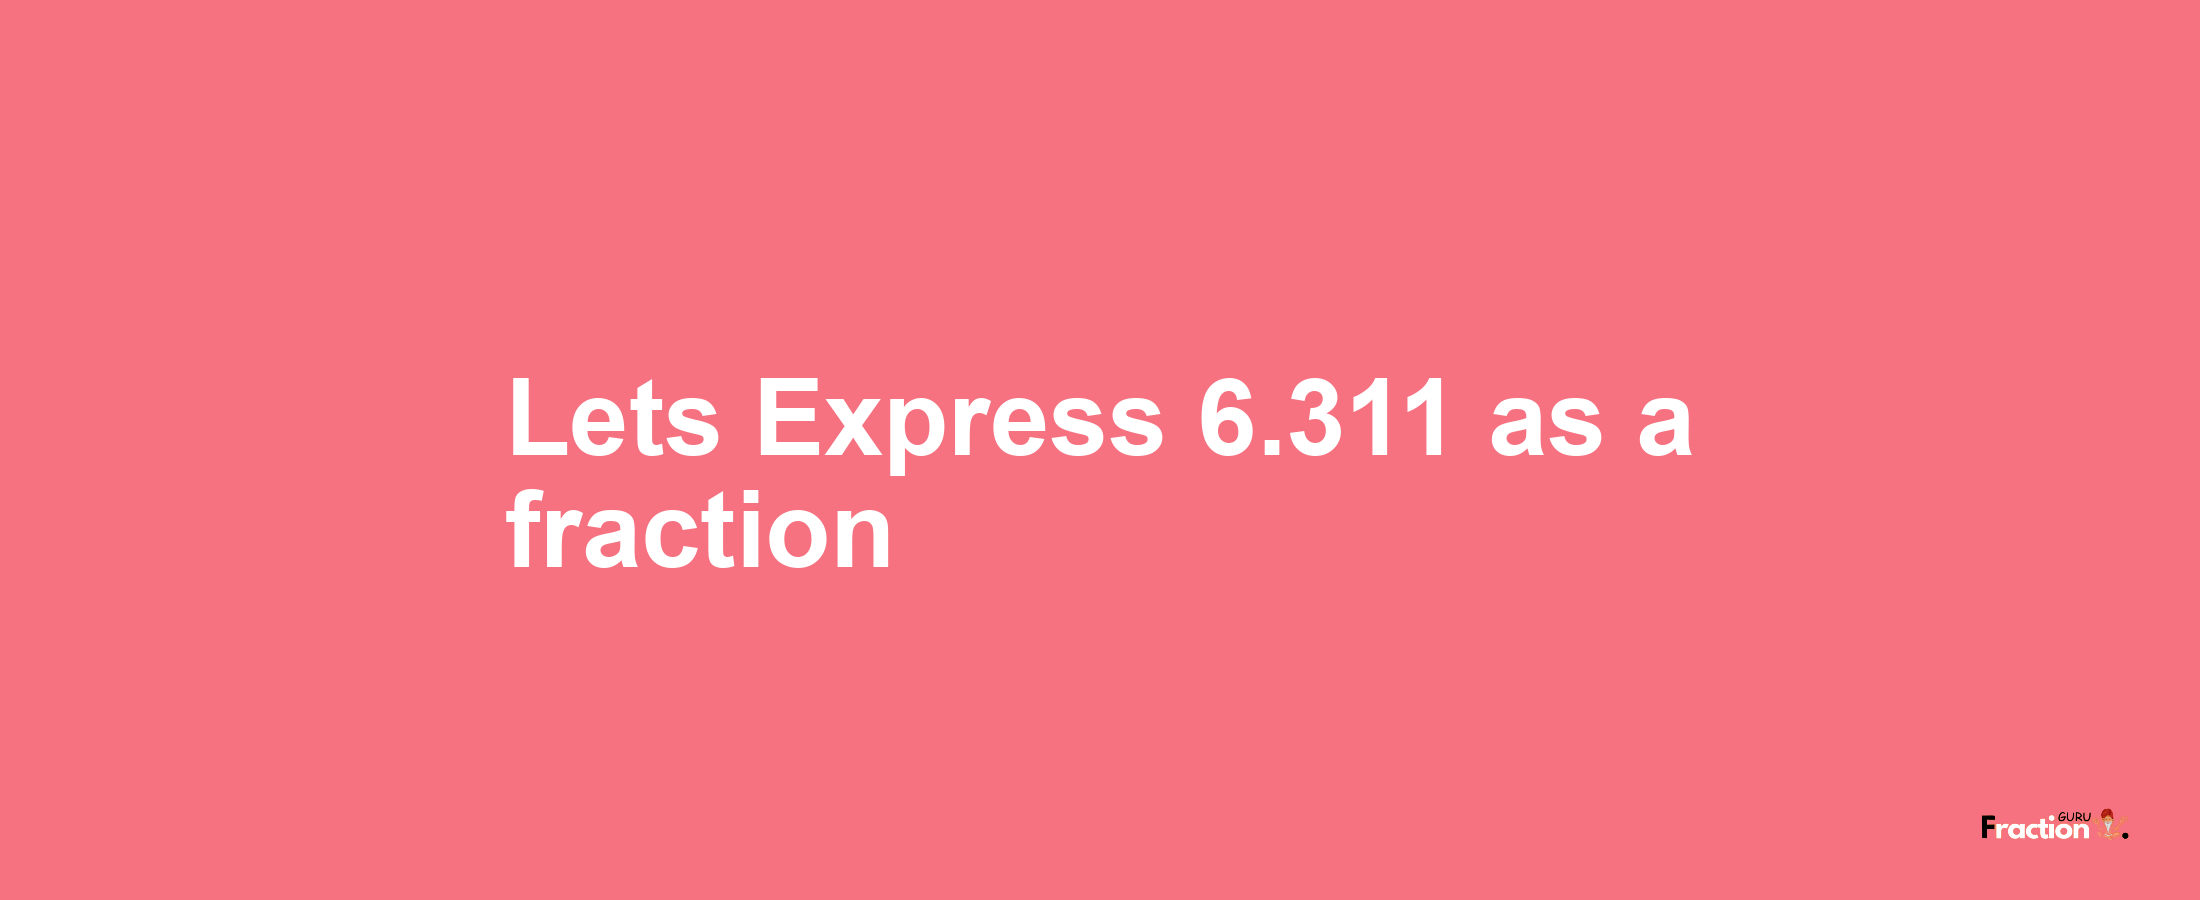 Lets Express 6.311 as afraction